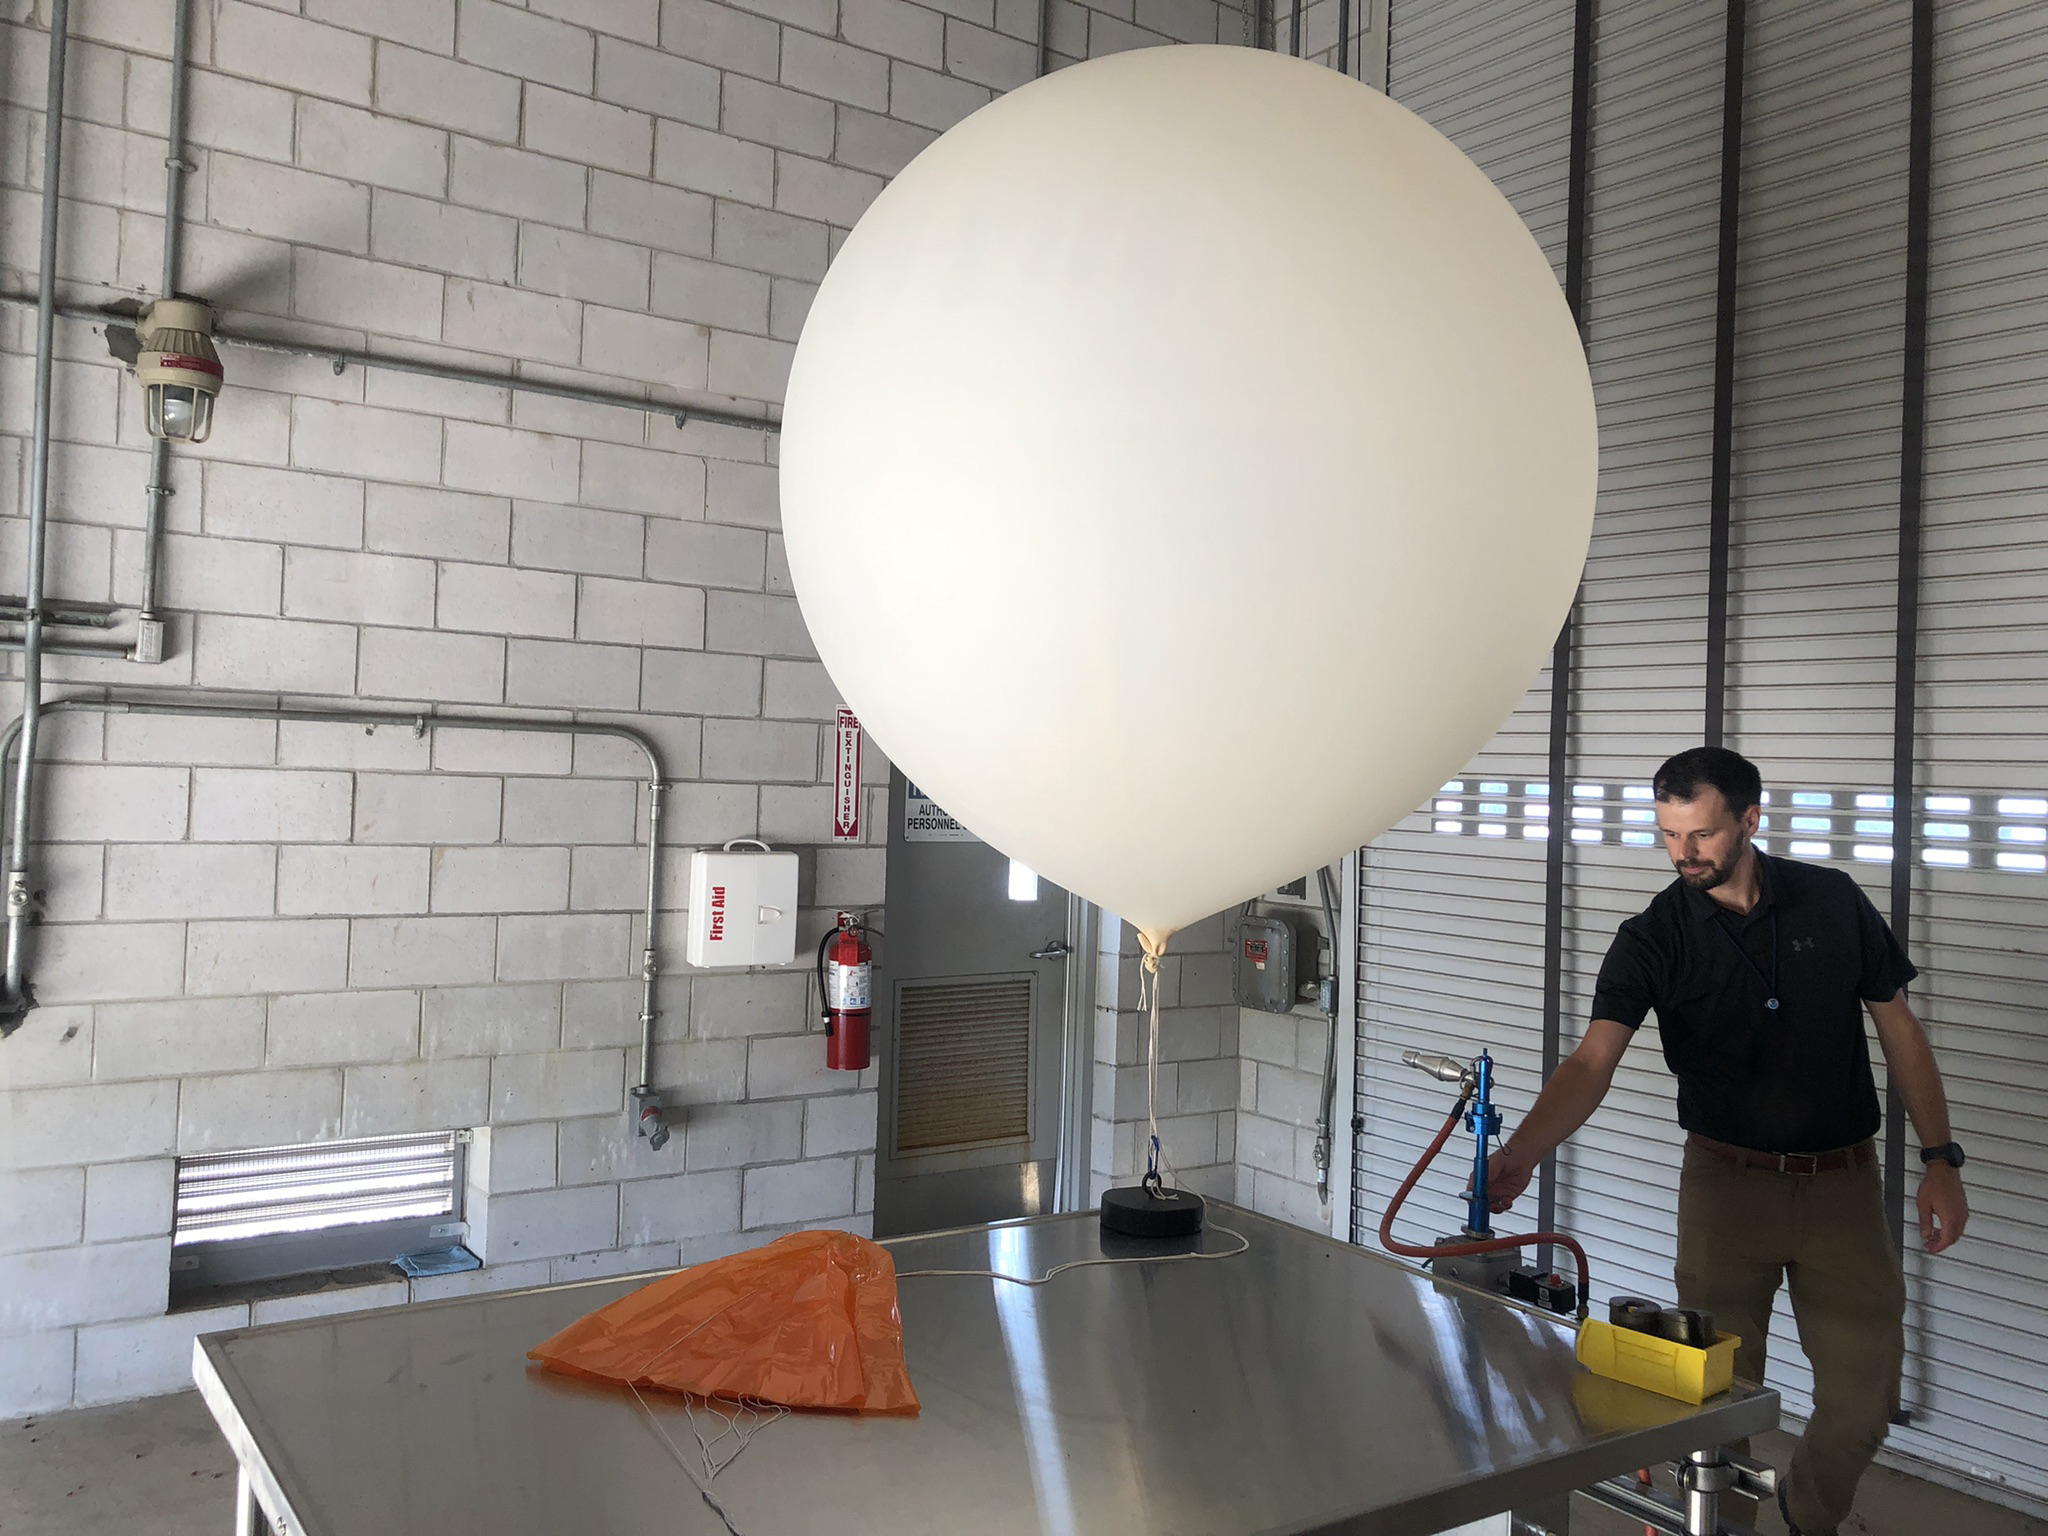 Weather balloon ready for launch.